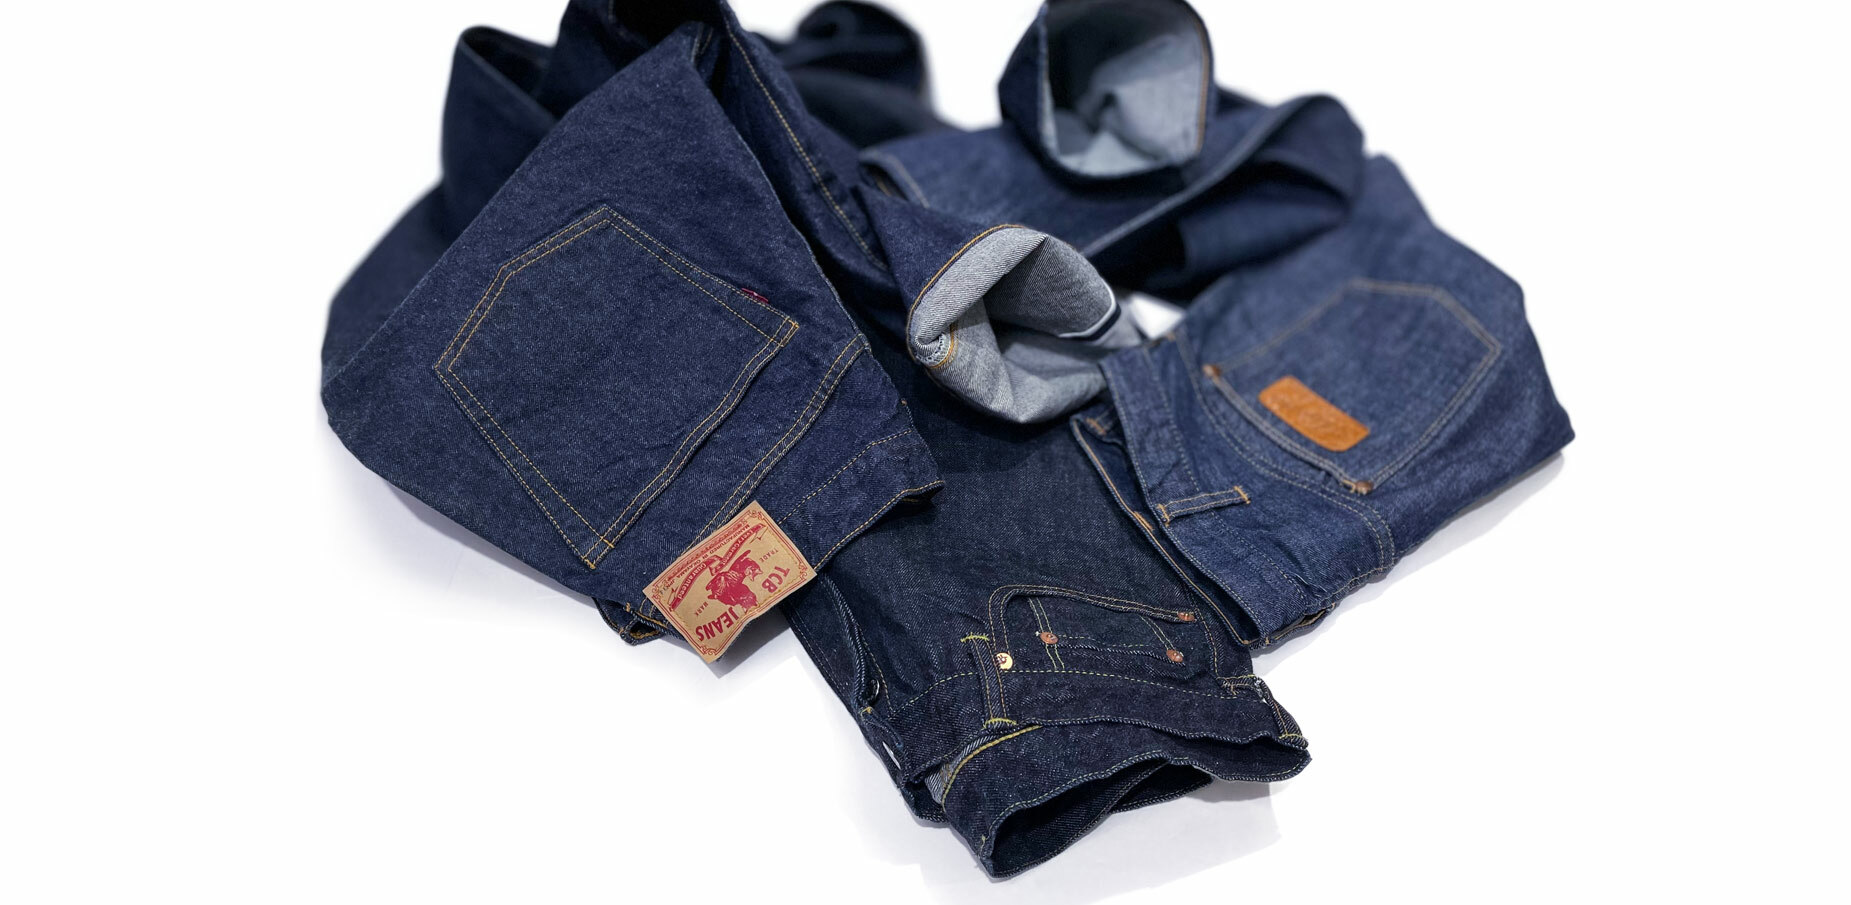 Williamsburg Garment Co. Introduces TBC Jeans at the Two Cats Brand launch party